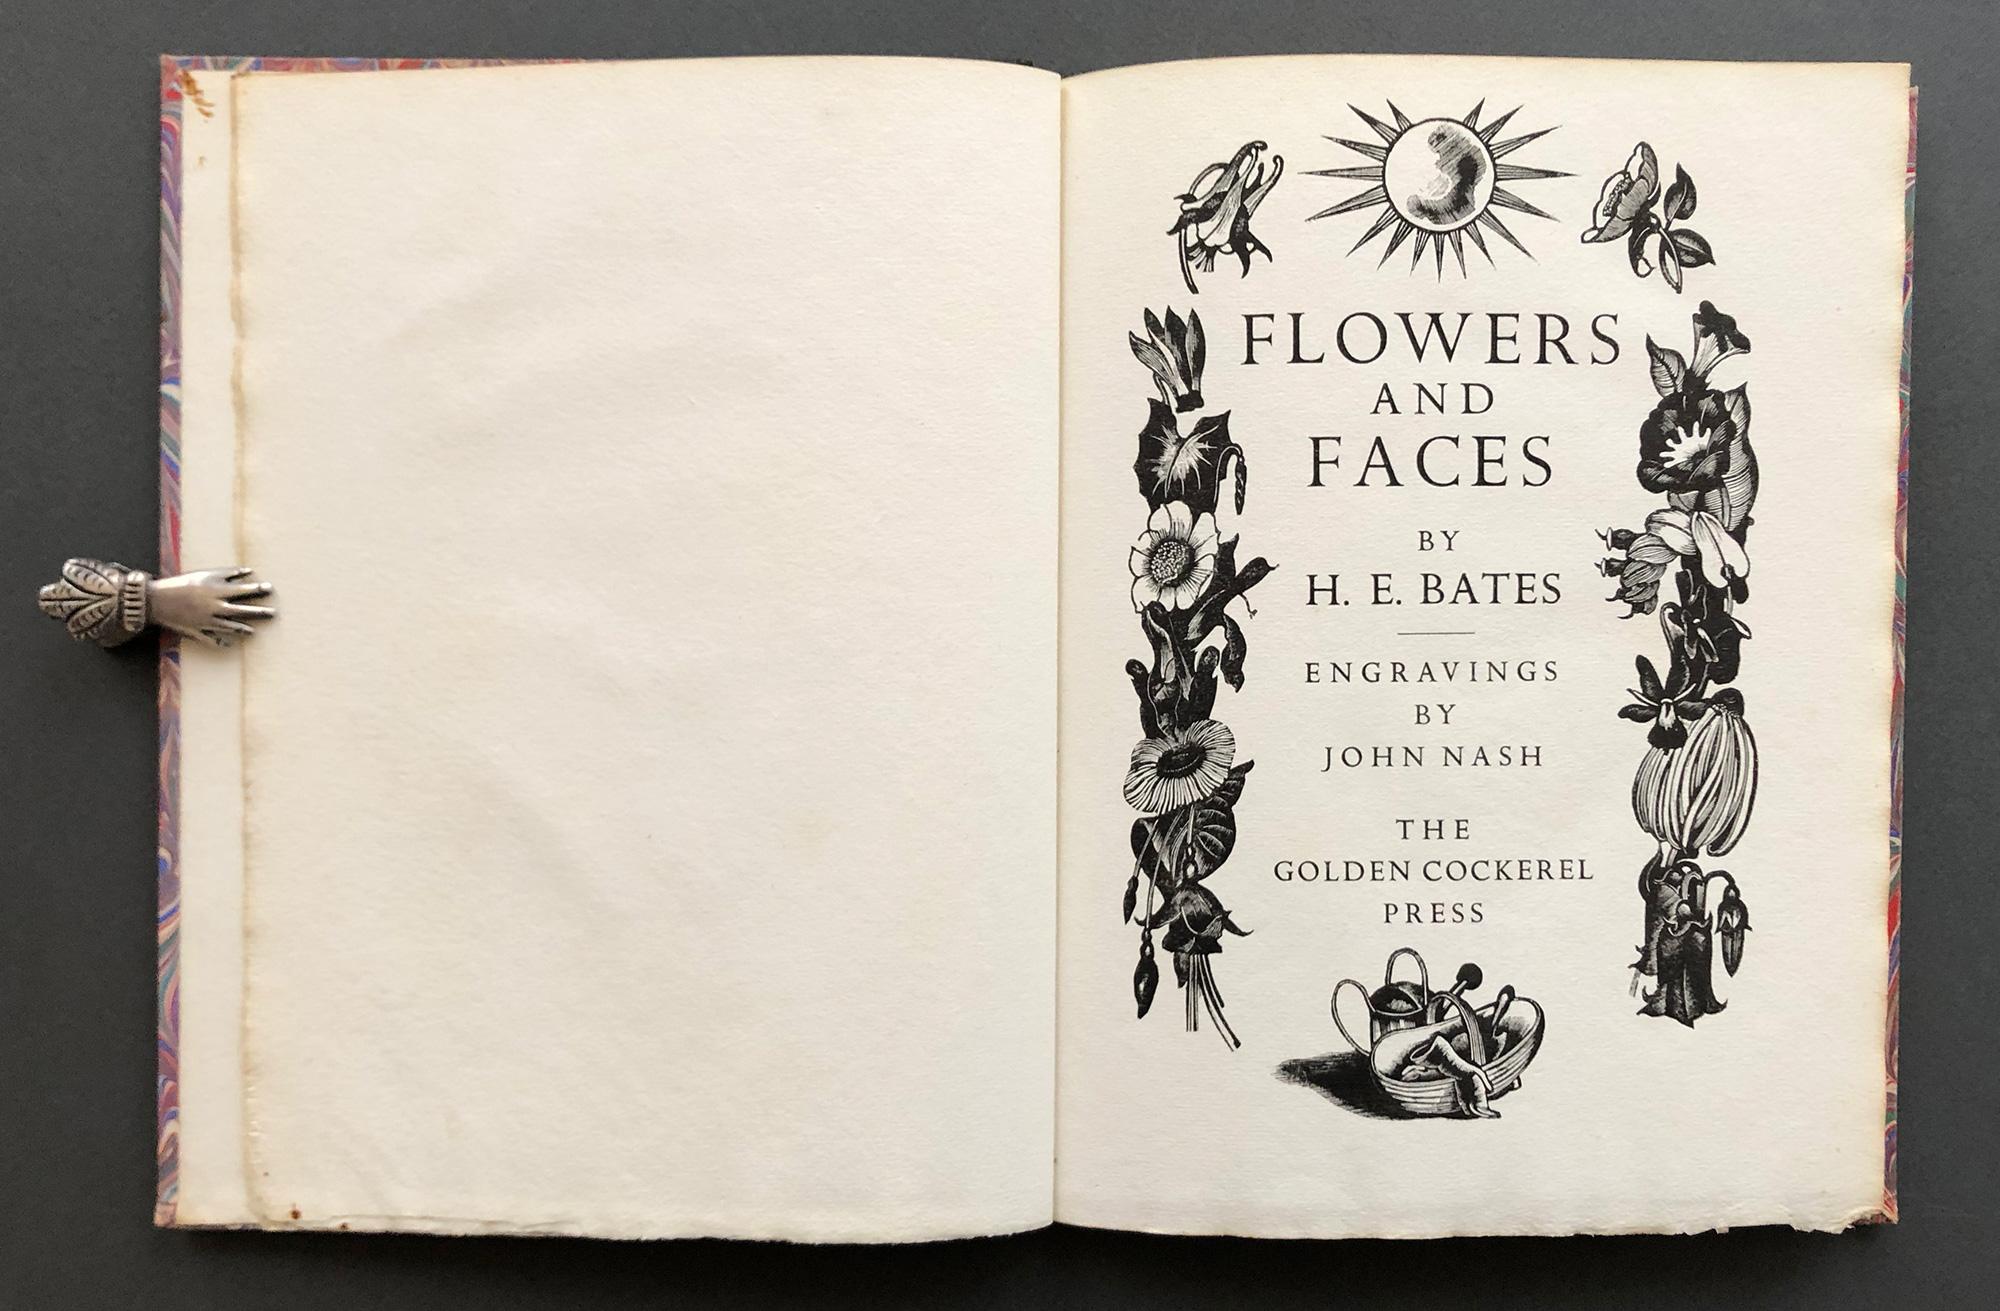 A lovely SIGNED LIMITED EDITION by the GOLDEN COCKEREL PRESS 
Bates, H.E. / John Nash ill. Flowers and Faces. 
Waltham Saint Lawrence: Golden Cockerel Press, 1935. Limited Edition. 
4to, 10 x 7 1/2 in (250 x 185mm); 54 pp.; 5 wood-engraved